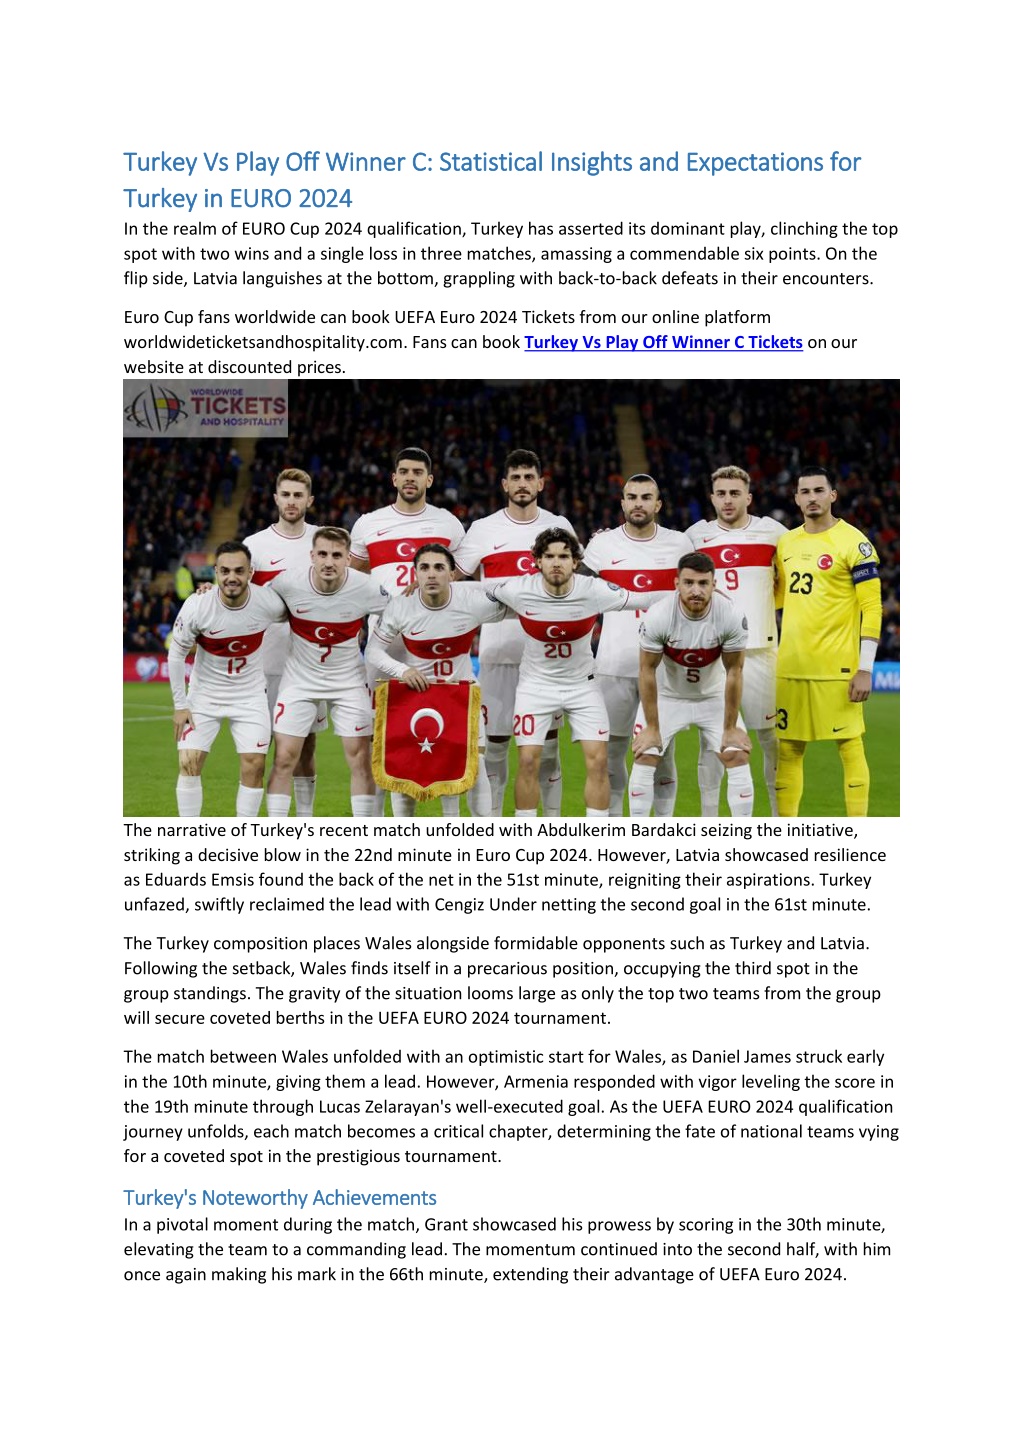 PPT - Turkey Vs Play Off Winner C Statistical Insights and Expectations ...